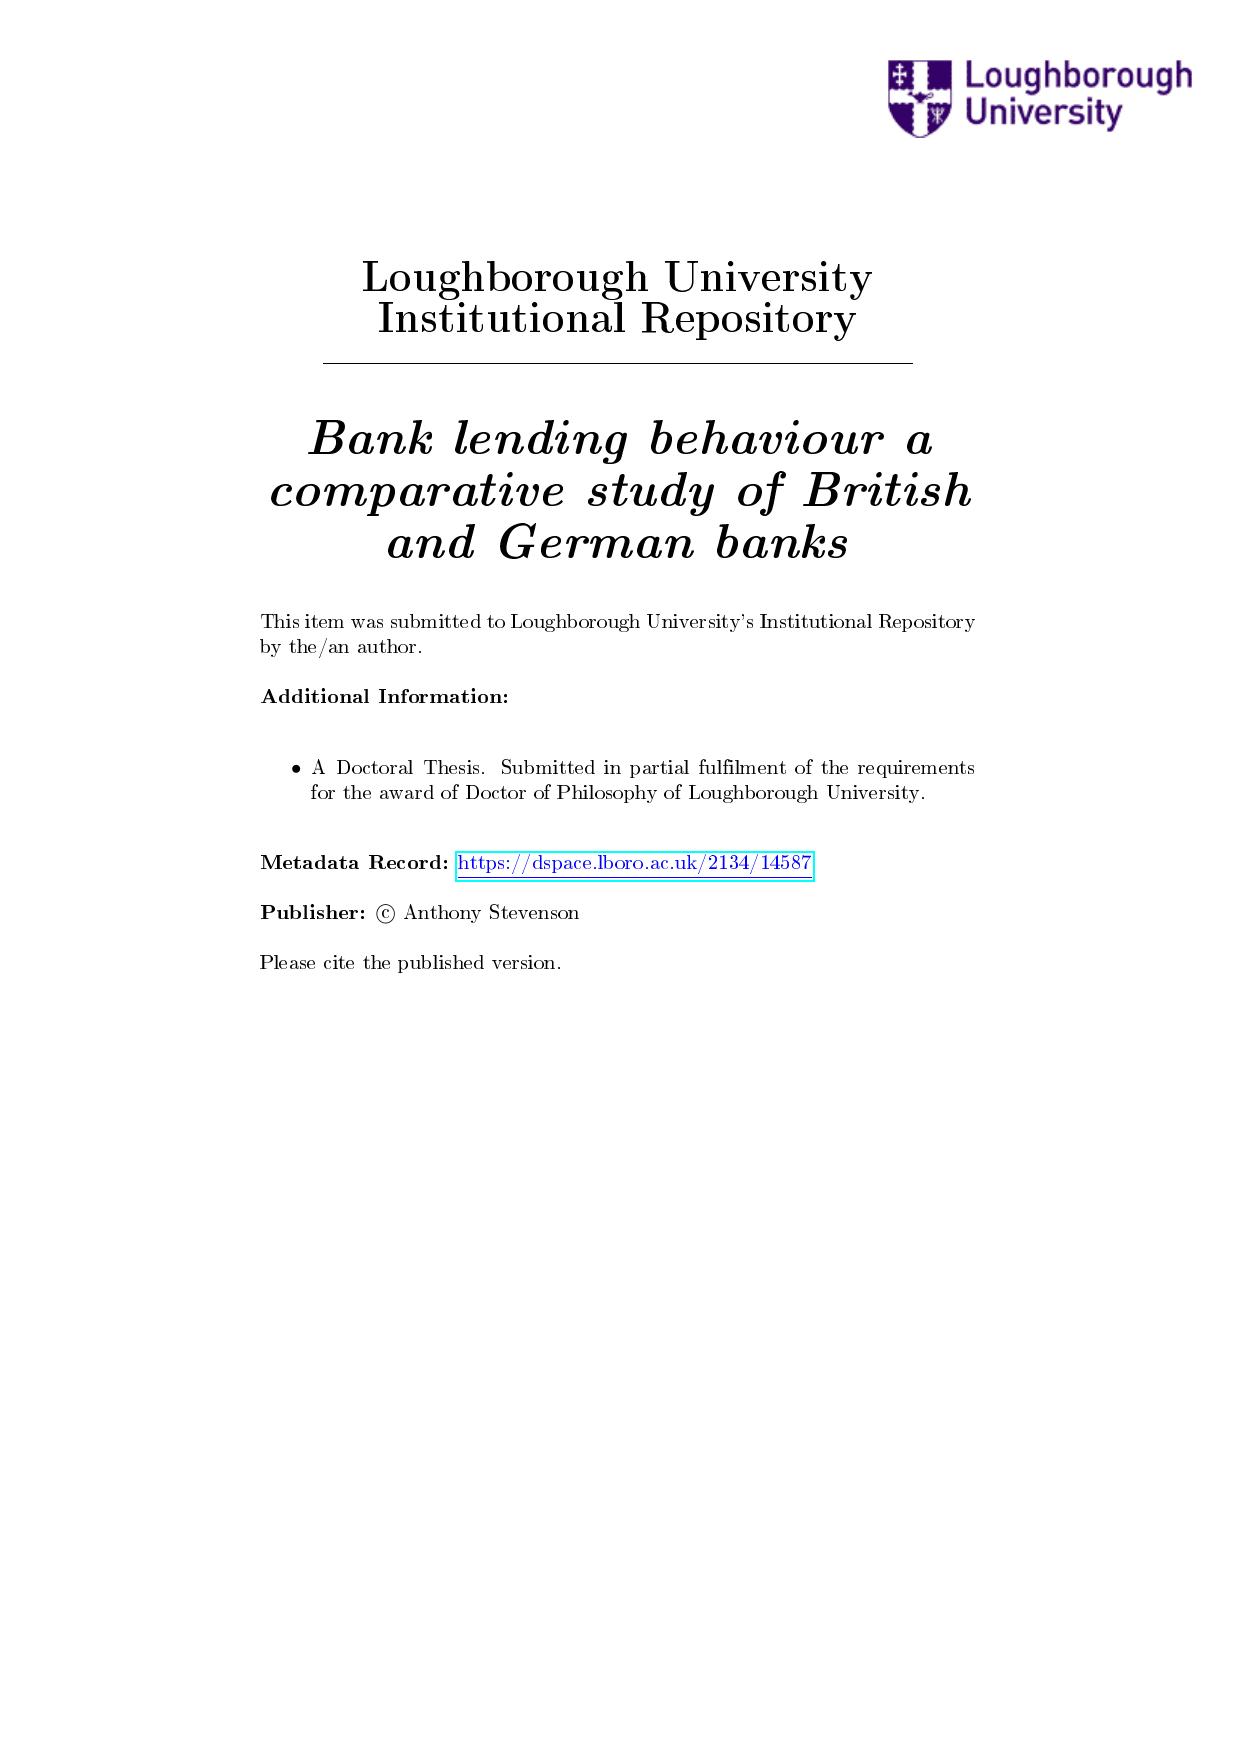 Bank Lending Behaviour a Comparative Study of British and German Banks 2014